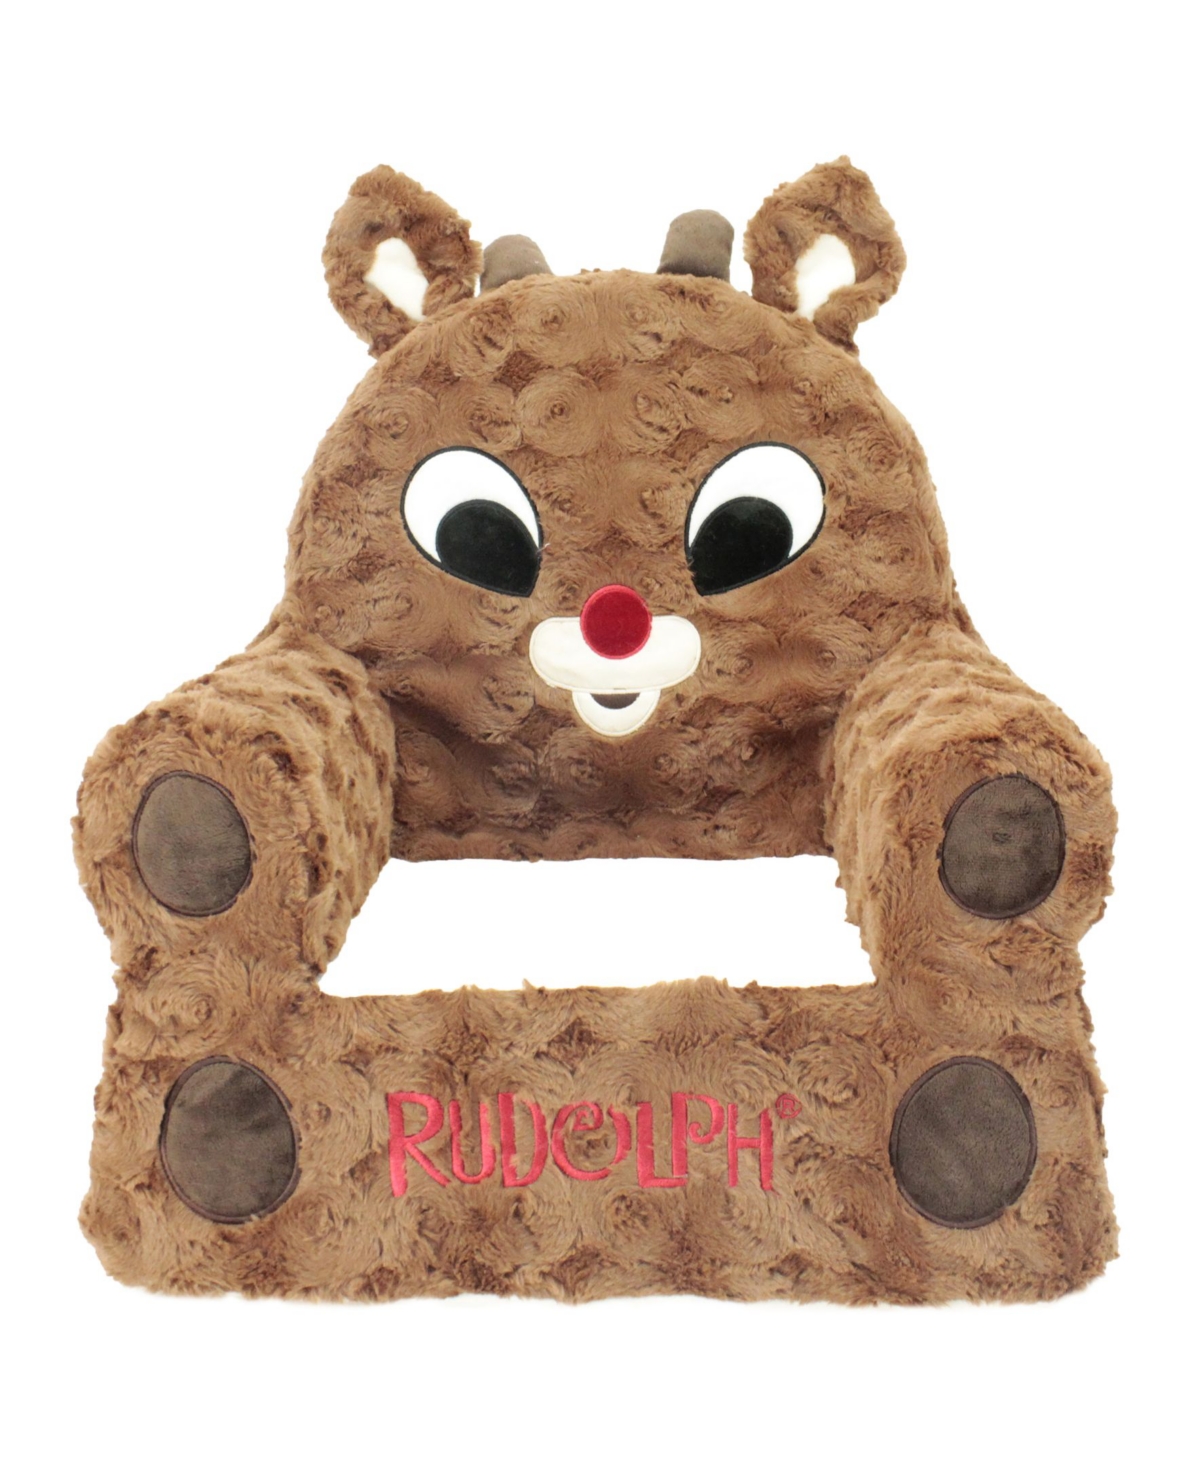 Animal Adventure Babies' Rudolph The Red-nosed Reindeer Soft Foam Character Chair In Brown